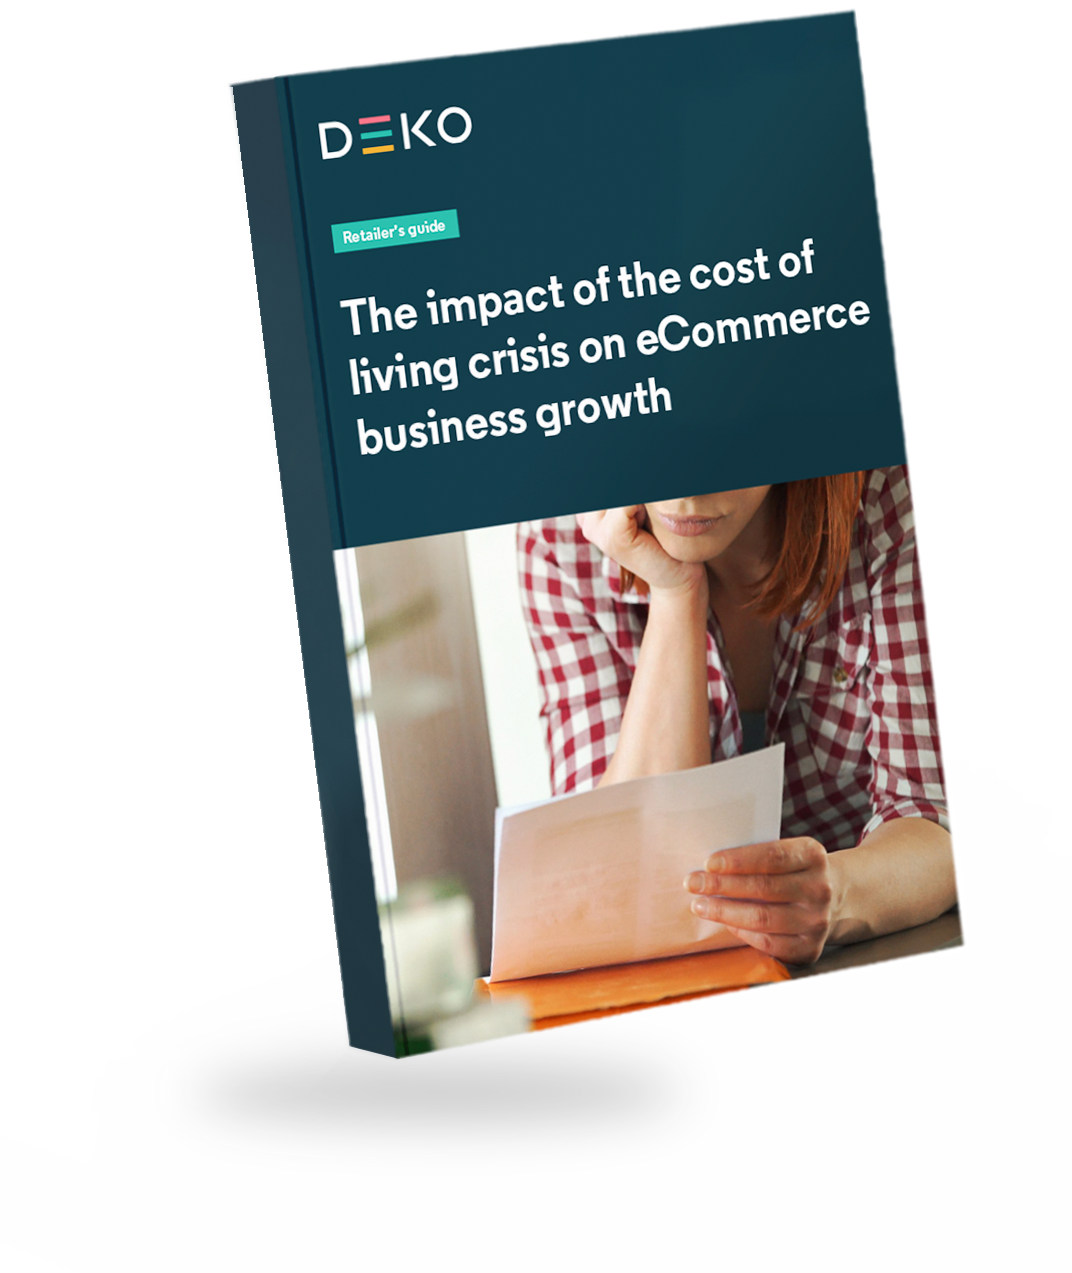 The impact of the cost of living crisis on eCommerce business growth